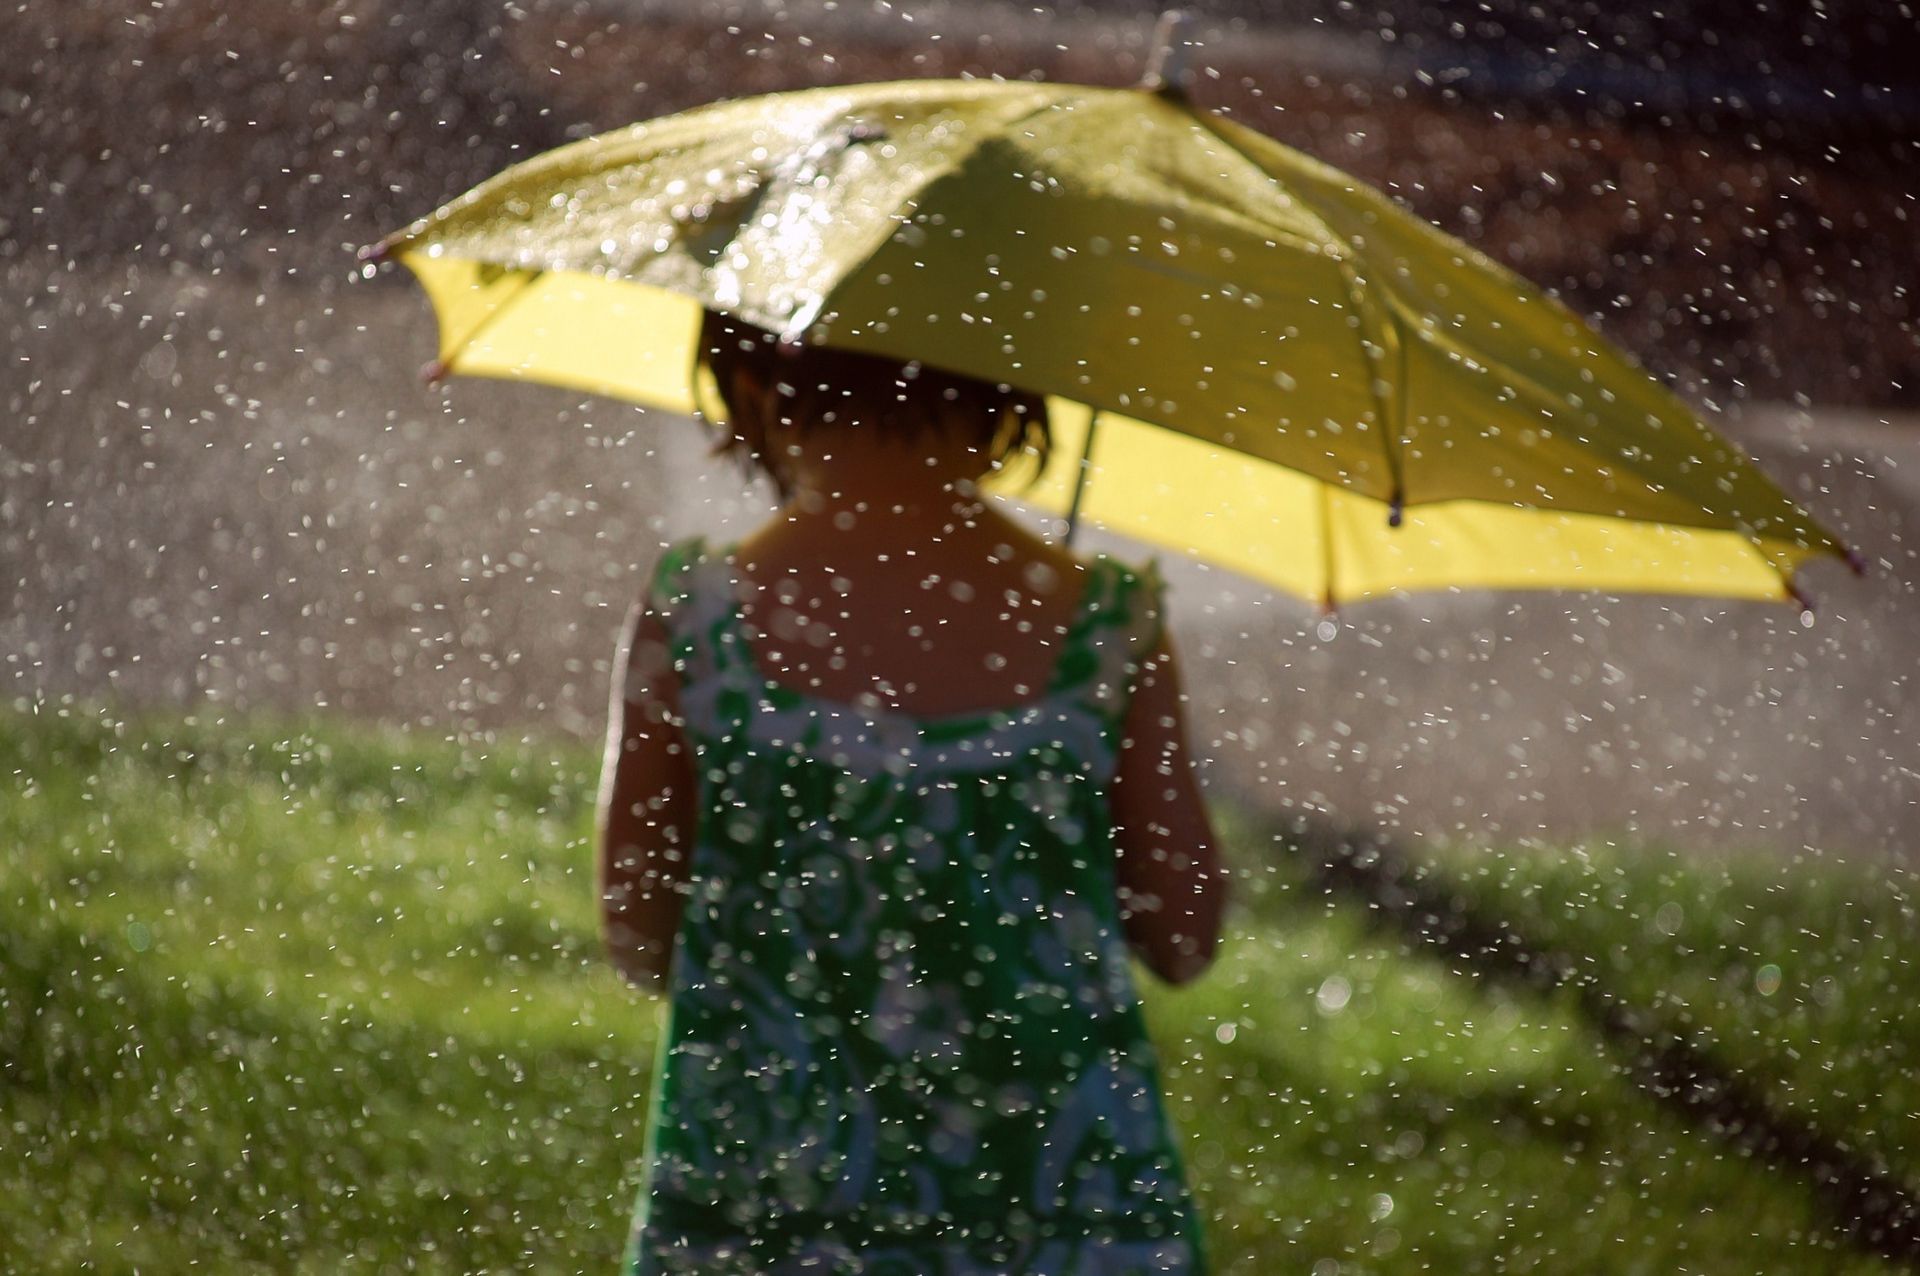 A little girl holds a yellow umbrella in the rain.